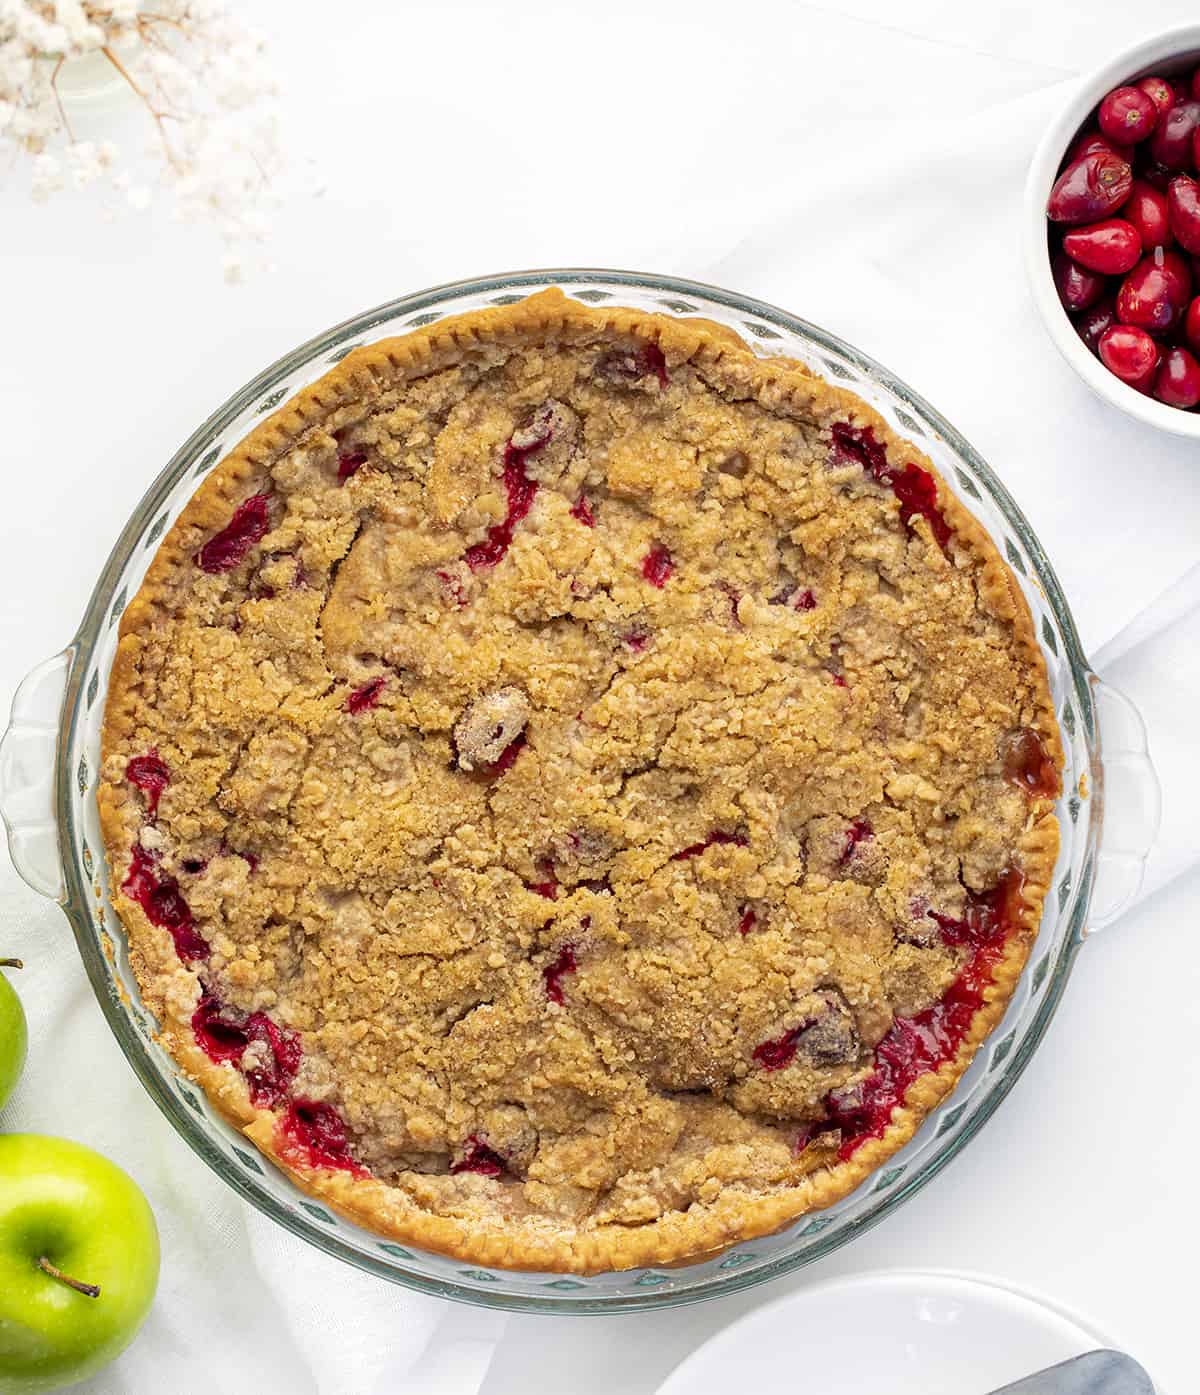 Baked French Apple Cranberry Pie with Apples and Cranberries Near it. Dessert, Baking, Pies, French Pies, Cranberry Pie, Apple Pie, Crumble for Pie, Homemade Pie, Holiday Pie, Christmas Pie, Thanksgiving Pie, Thanksgiving Dessert, Christmas Dessert, i am baker, iambaker